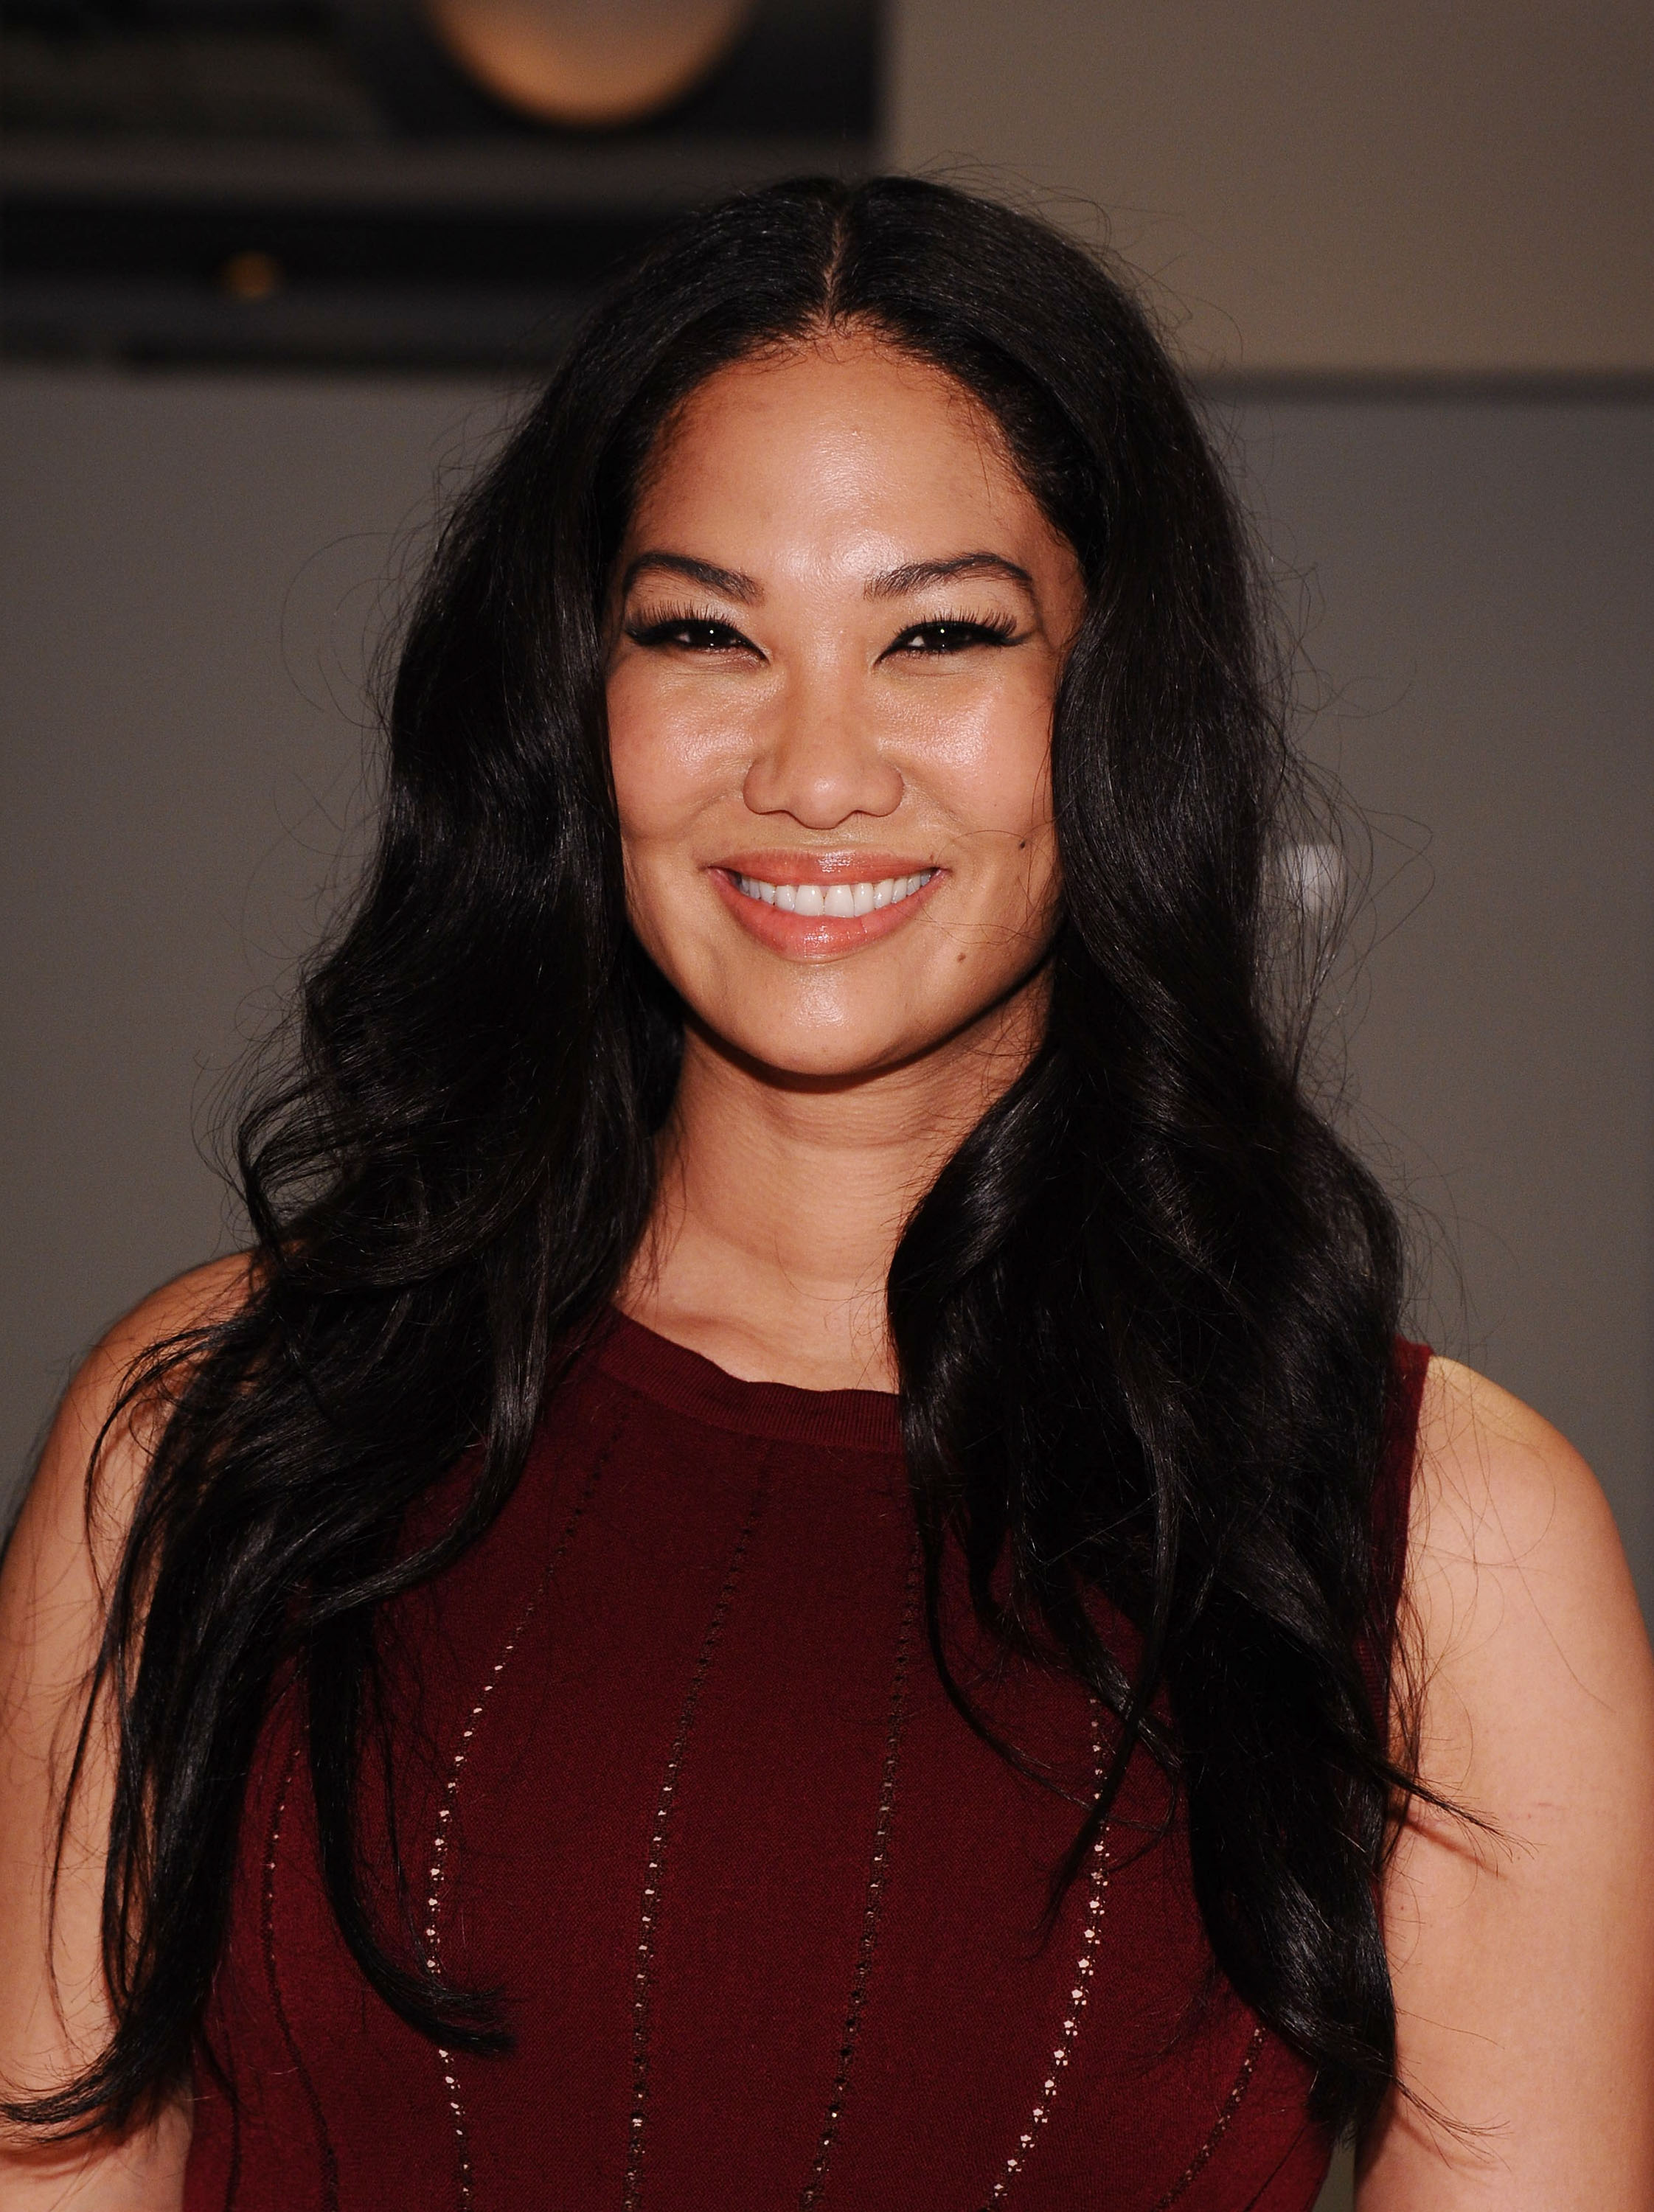 Kimora Lee Simmons at the Argyleculture By Russell Simmons fashion show during Mercedes-Benz Fashion Week in September 2014. | Photo: Getty Images